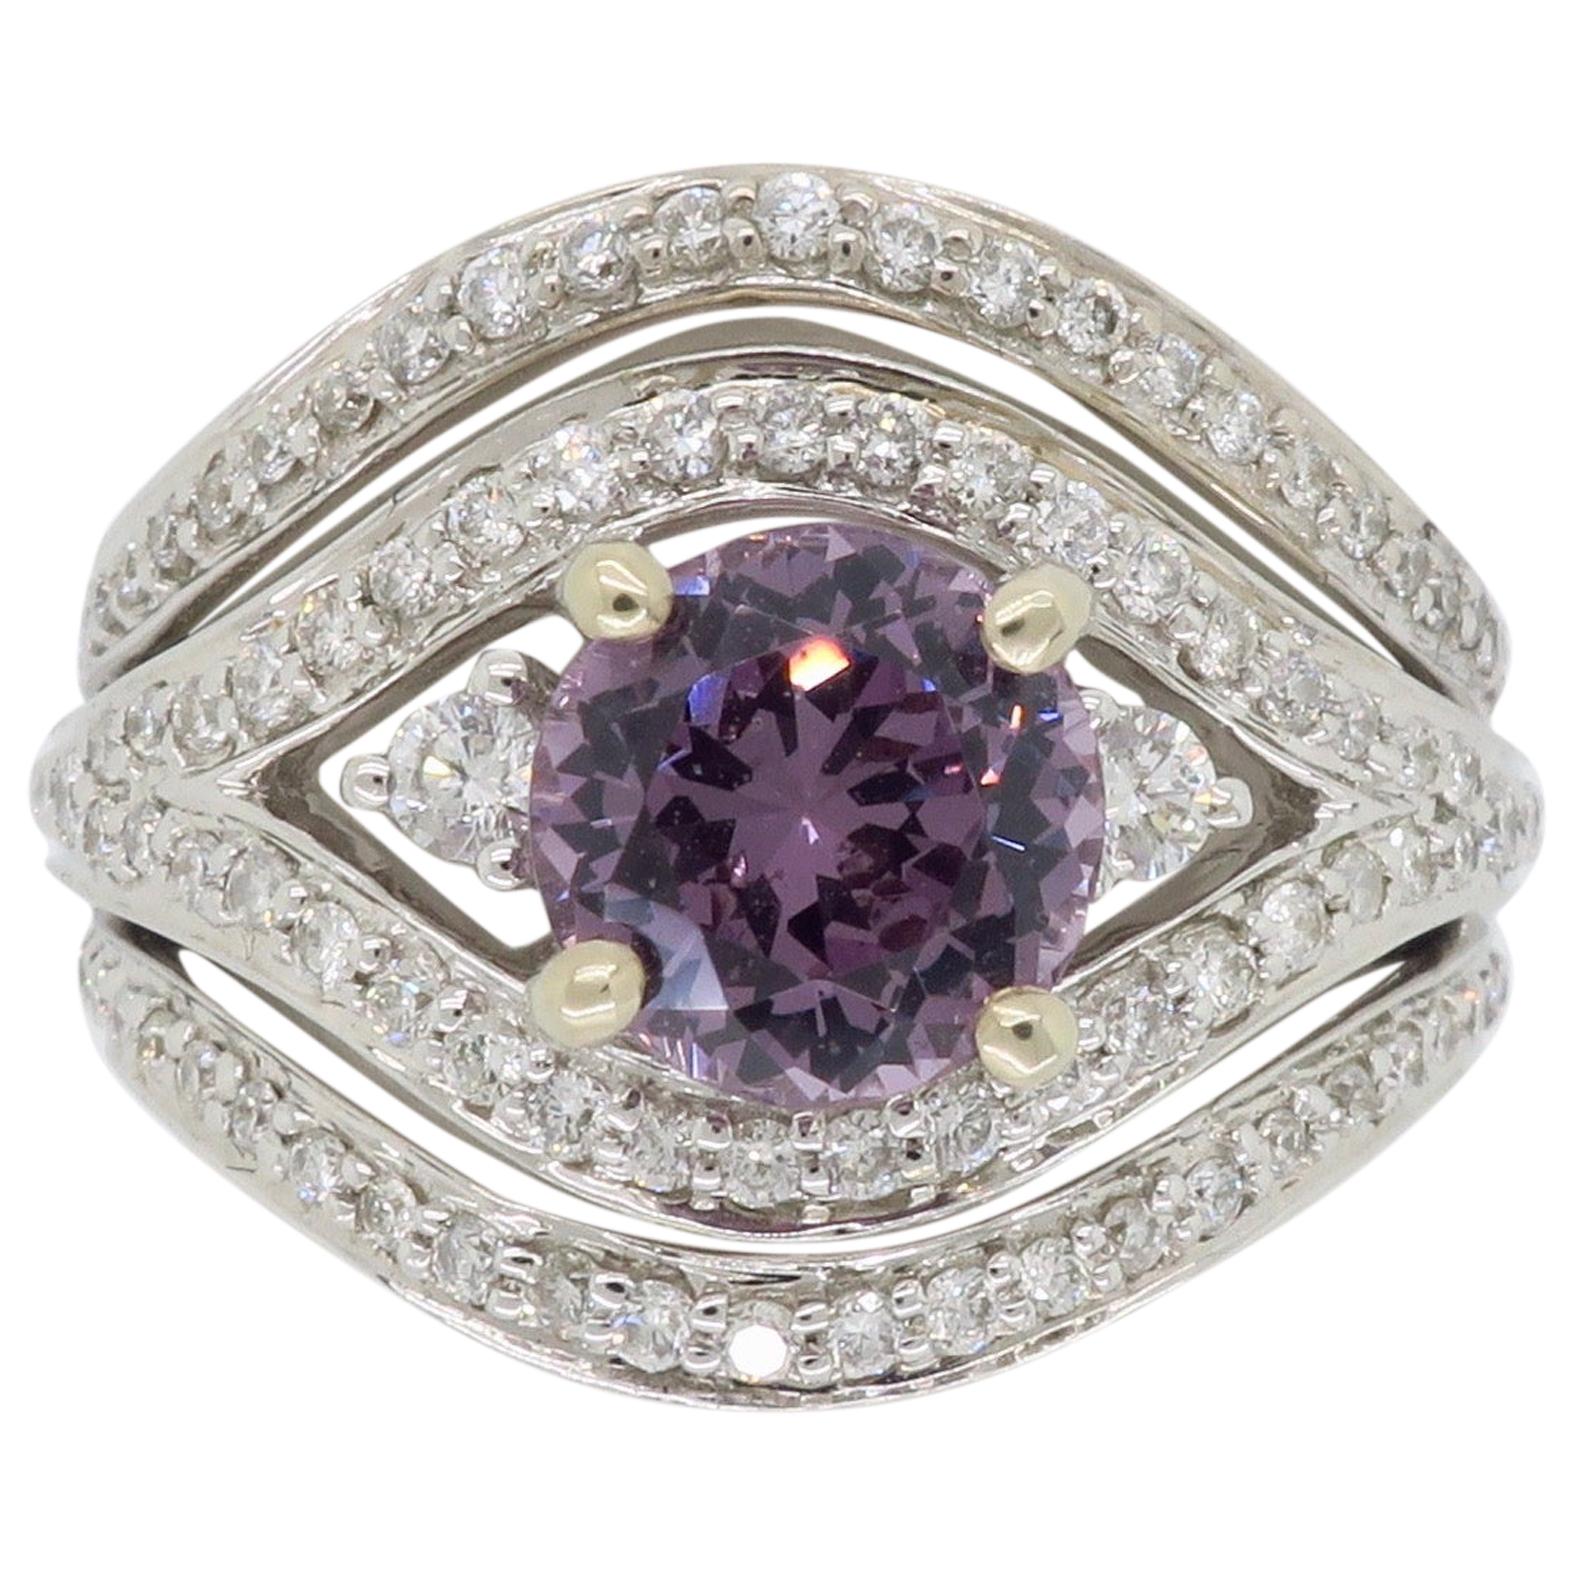 Diamond and Purple Spinel Cocktail Ring